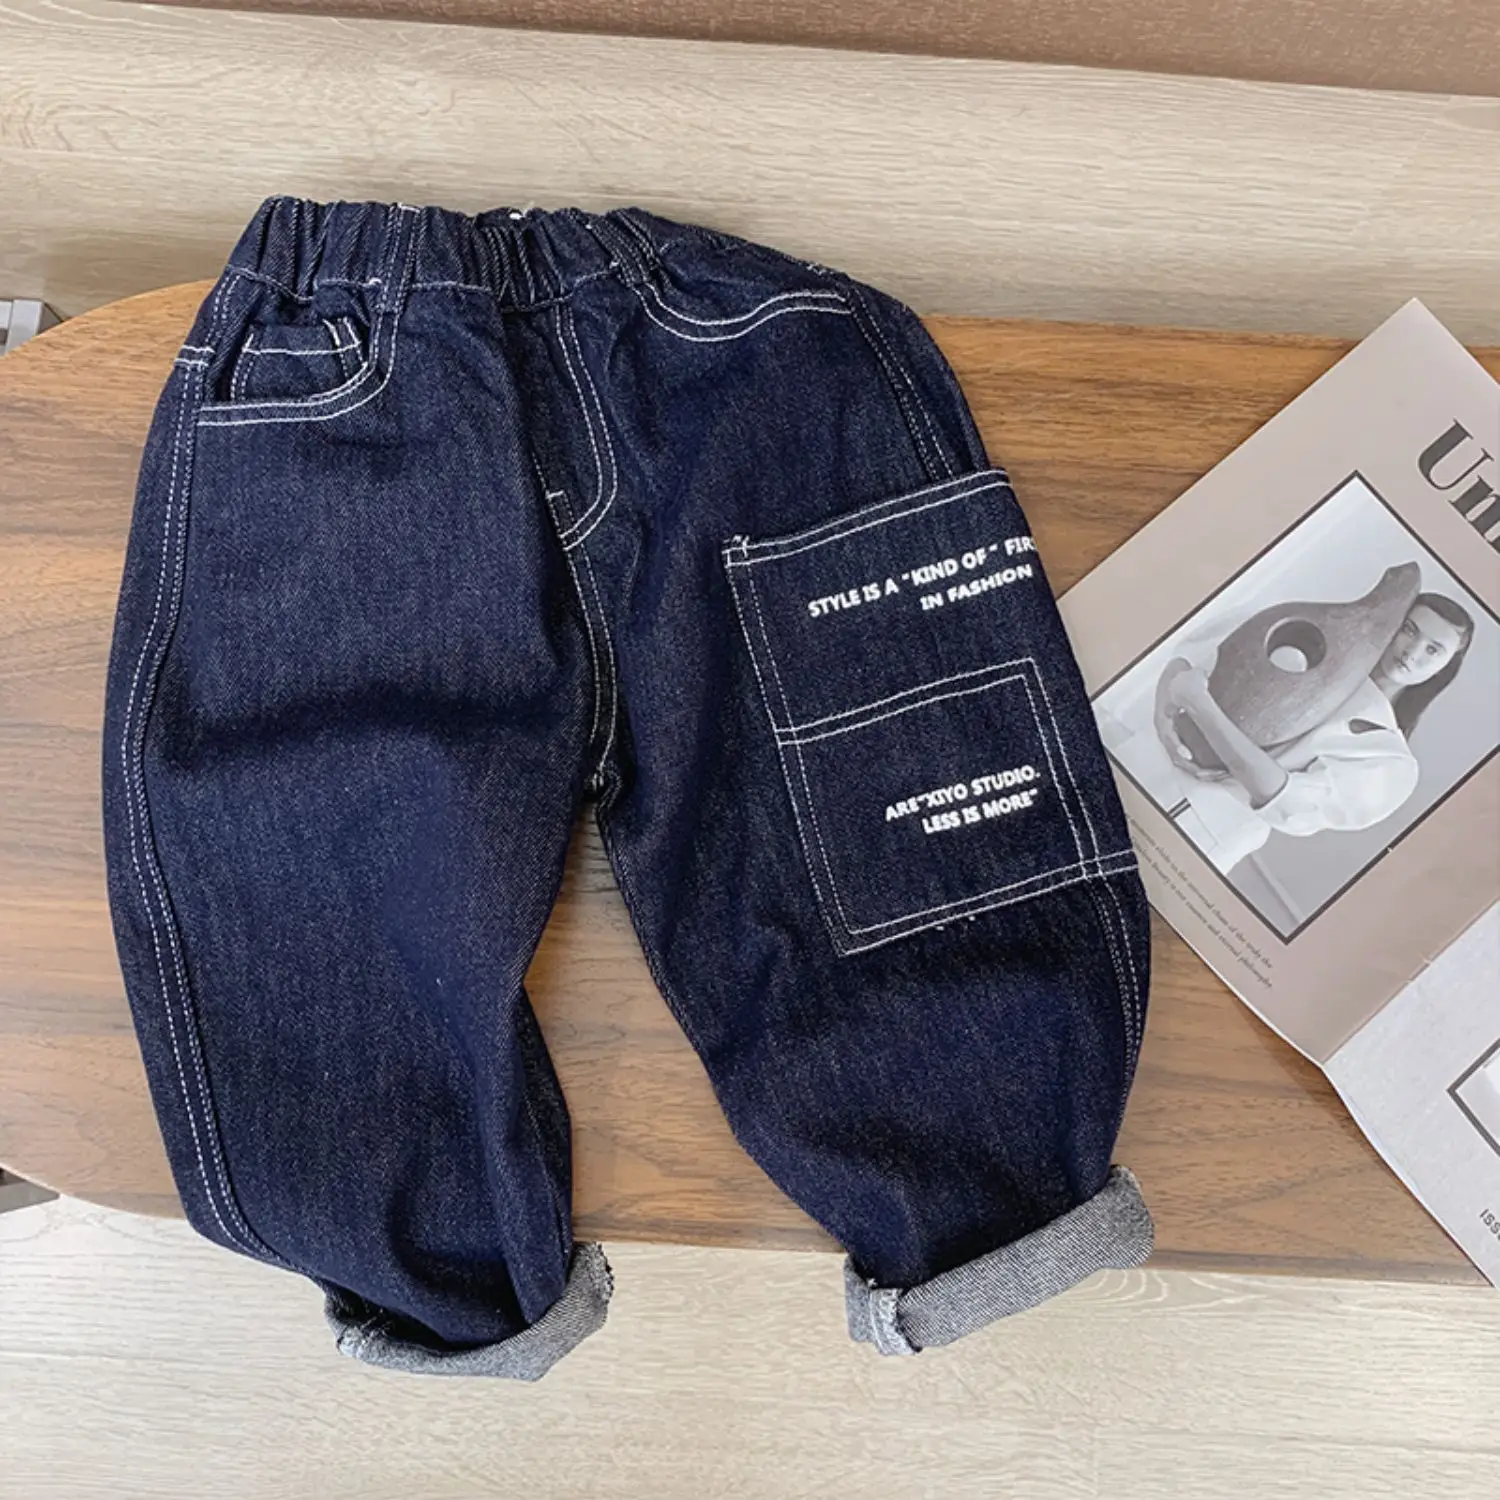 2022 New Kids' Jeans Elastic Waist Boys' Solid Loose Jogging Casual Pants Spring Autumn High Quality Clothing 2-14 Years Old